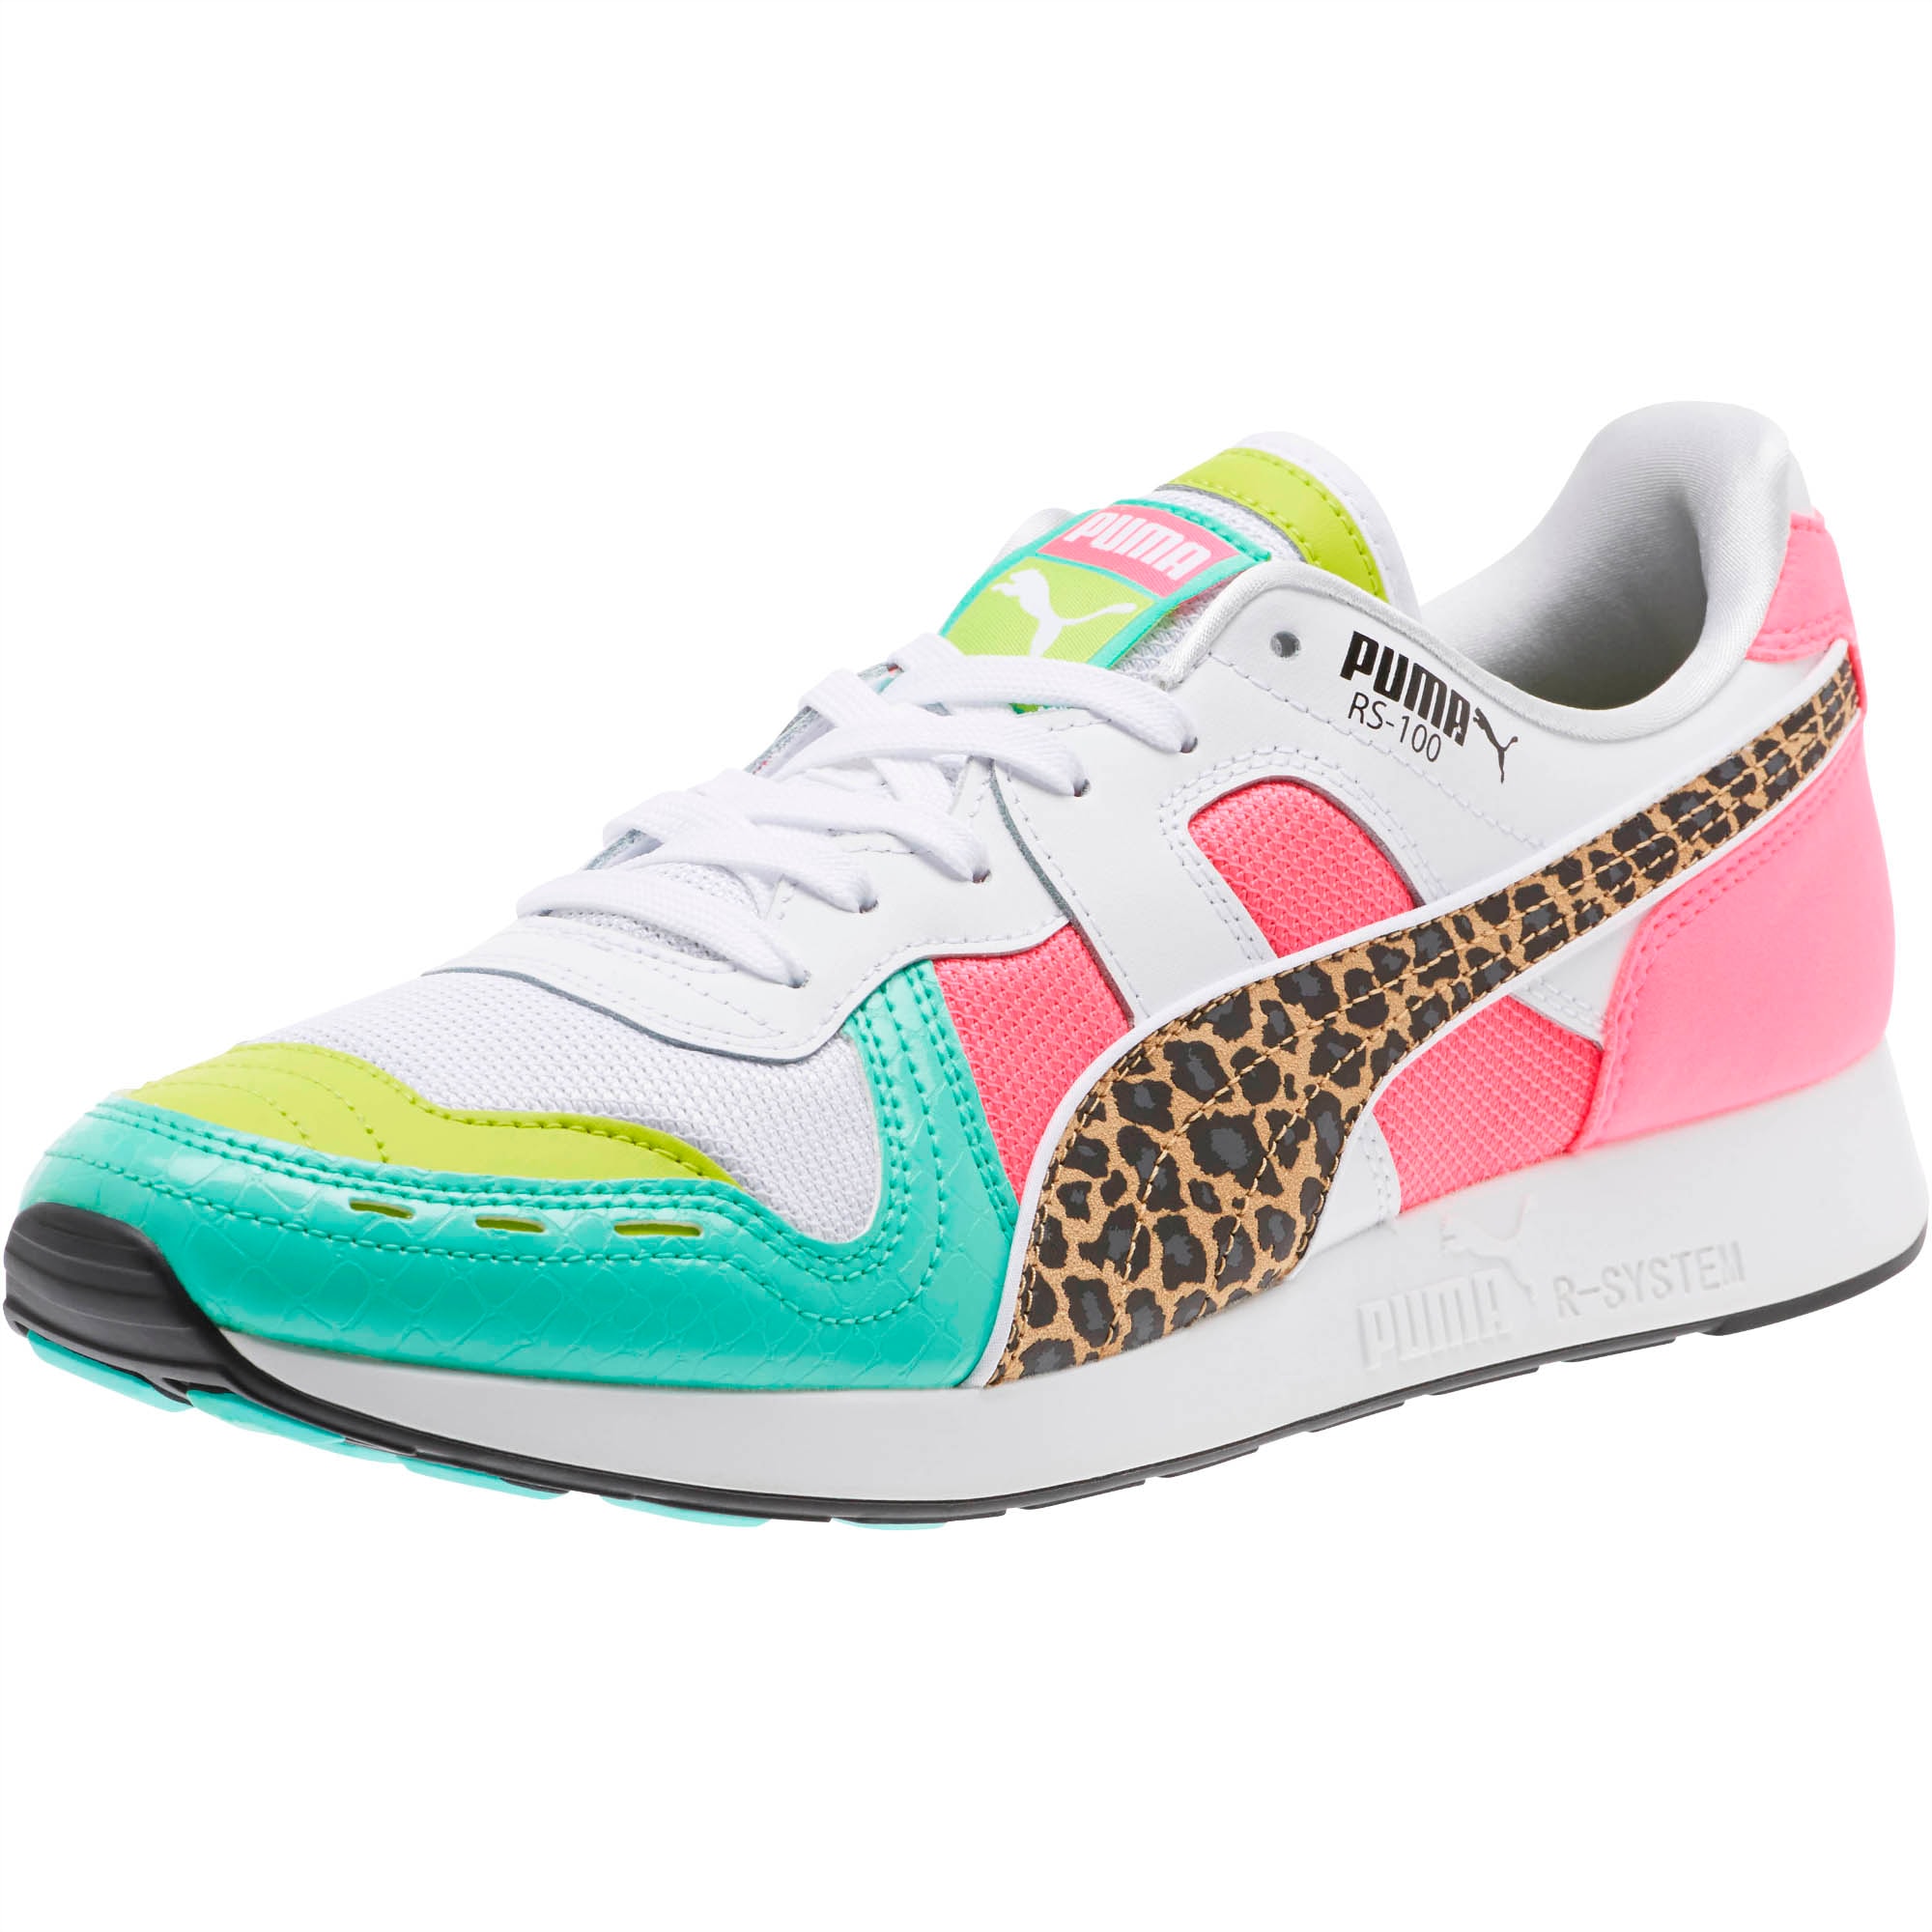 RS-100 Party Croc Sneakers | PUMA US